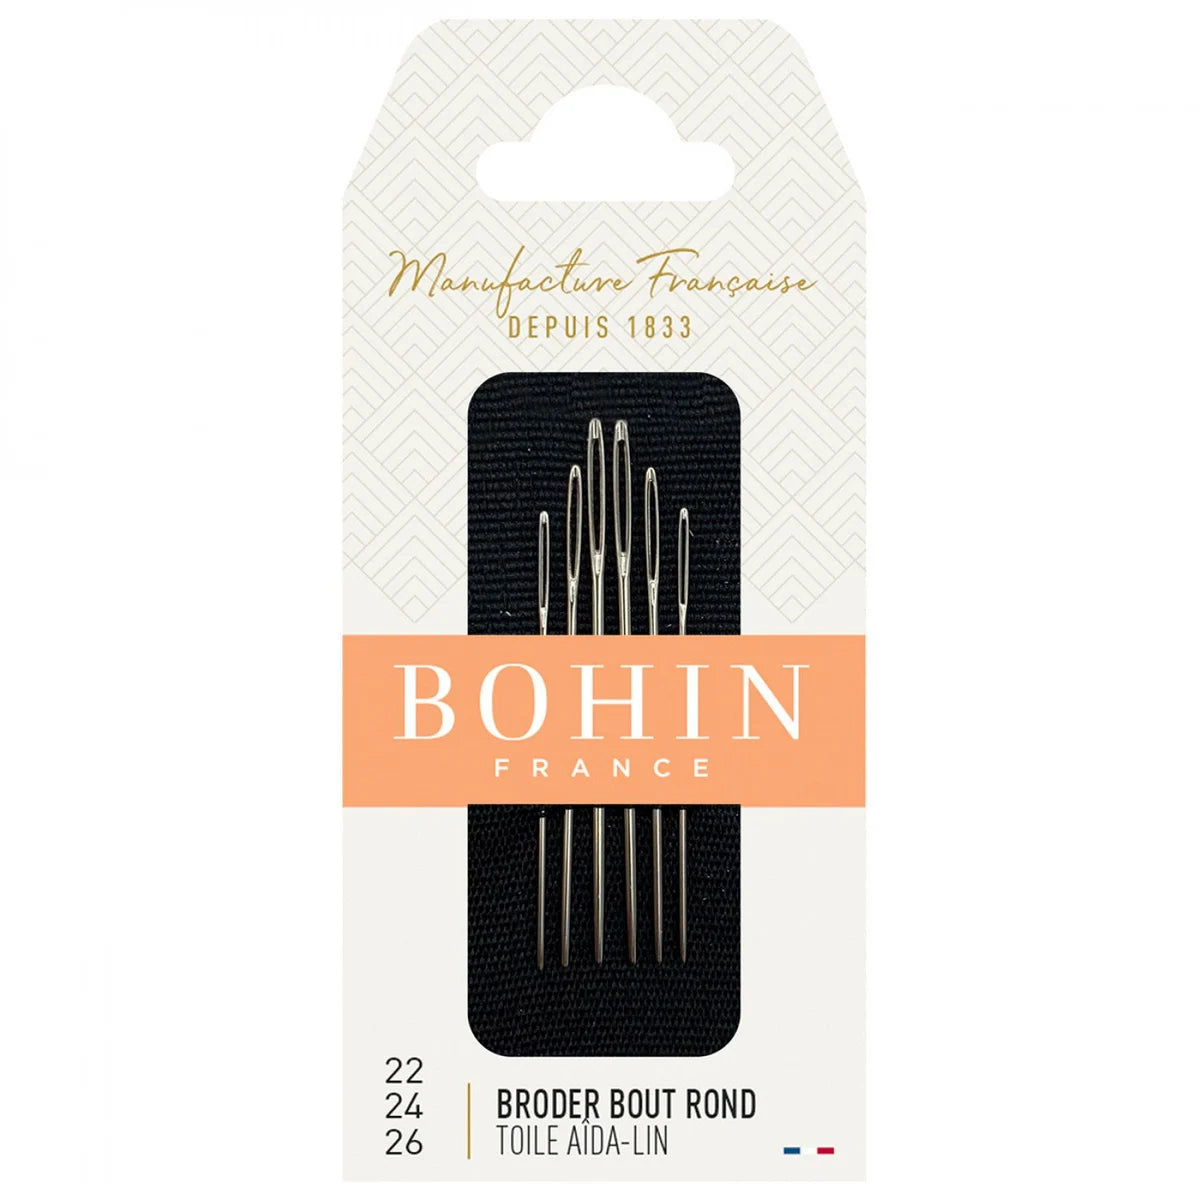 BOHIN Toile Aida-Lin (Broder Bout Rond) Needles - size 22, 24 & 26 - 6pcs